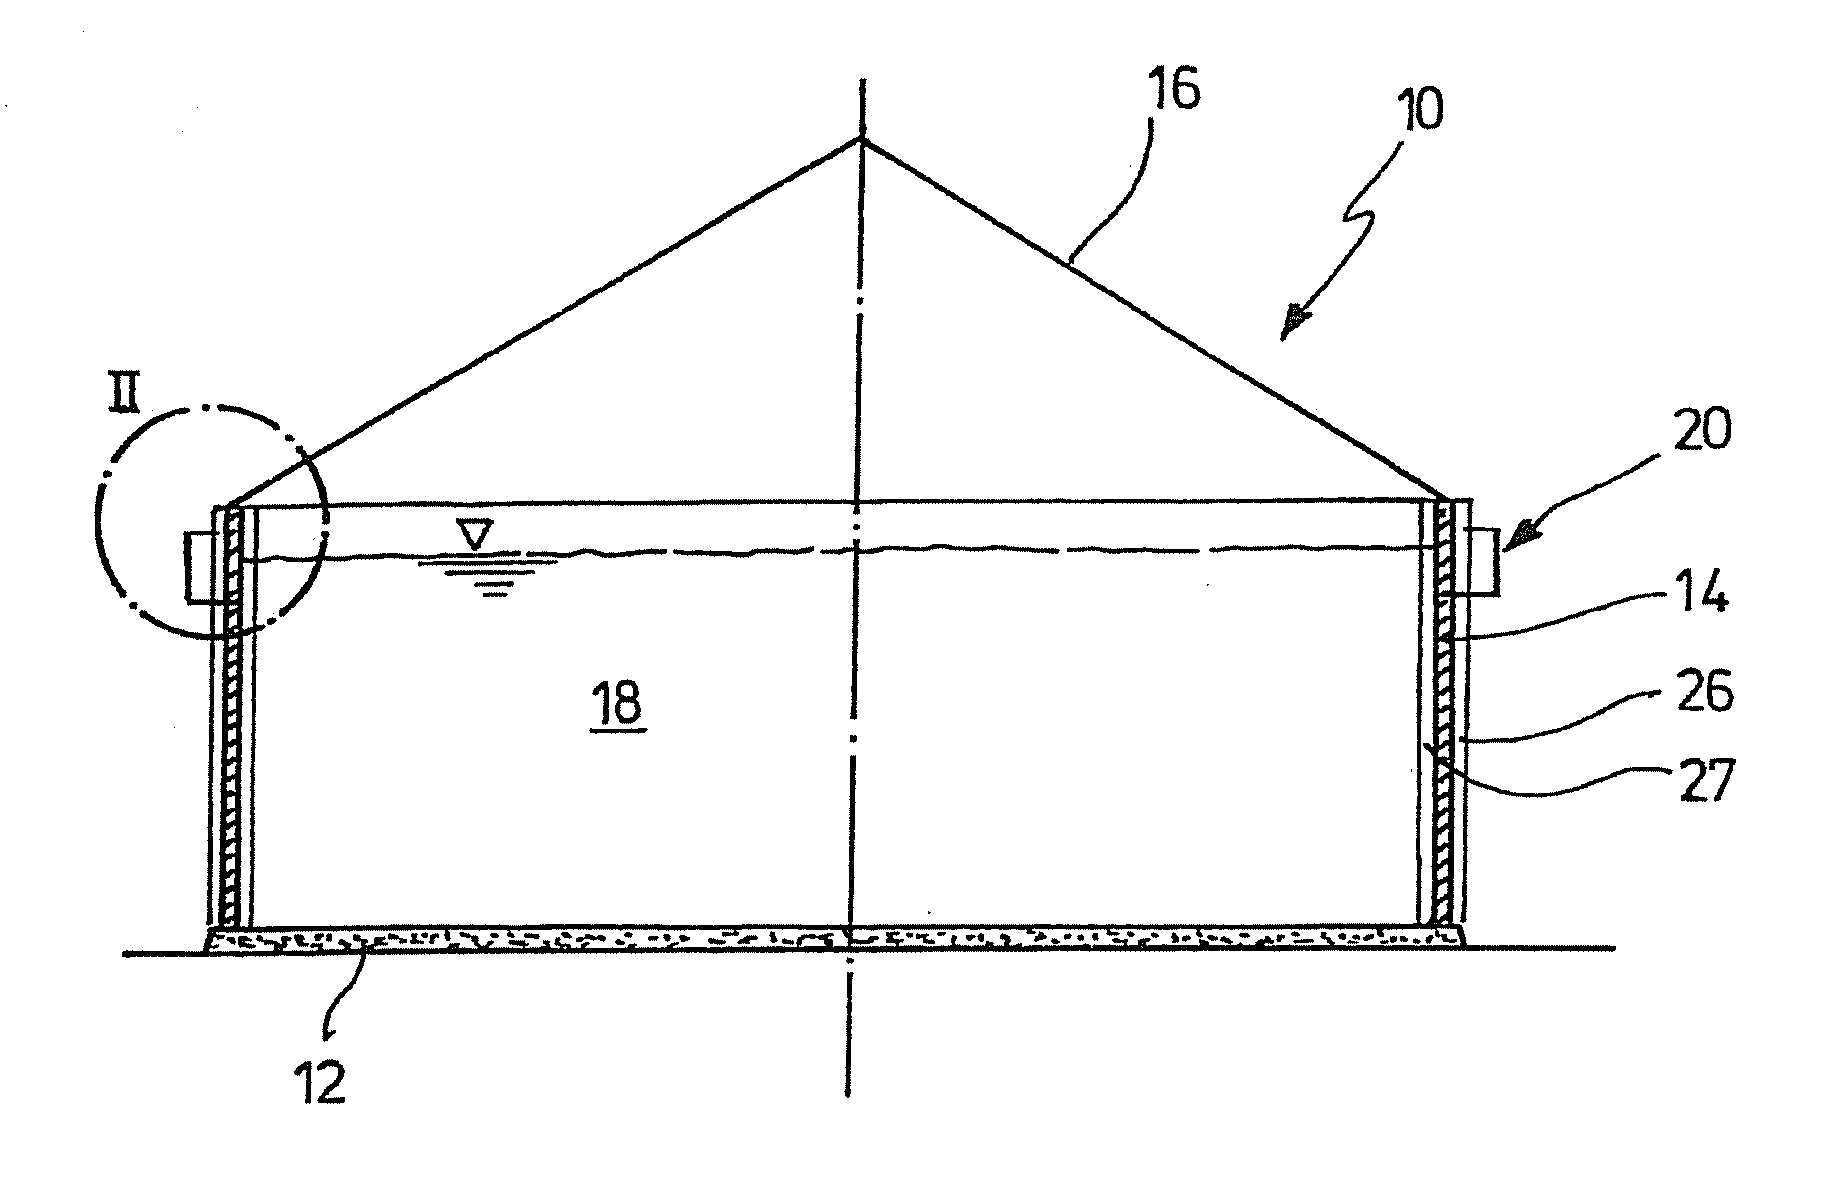 Container wall for a container covered by a foil and outer formwork for producing the container wall